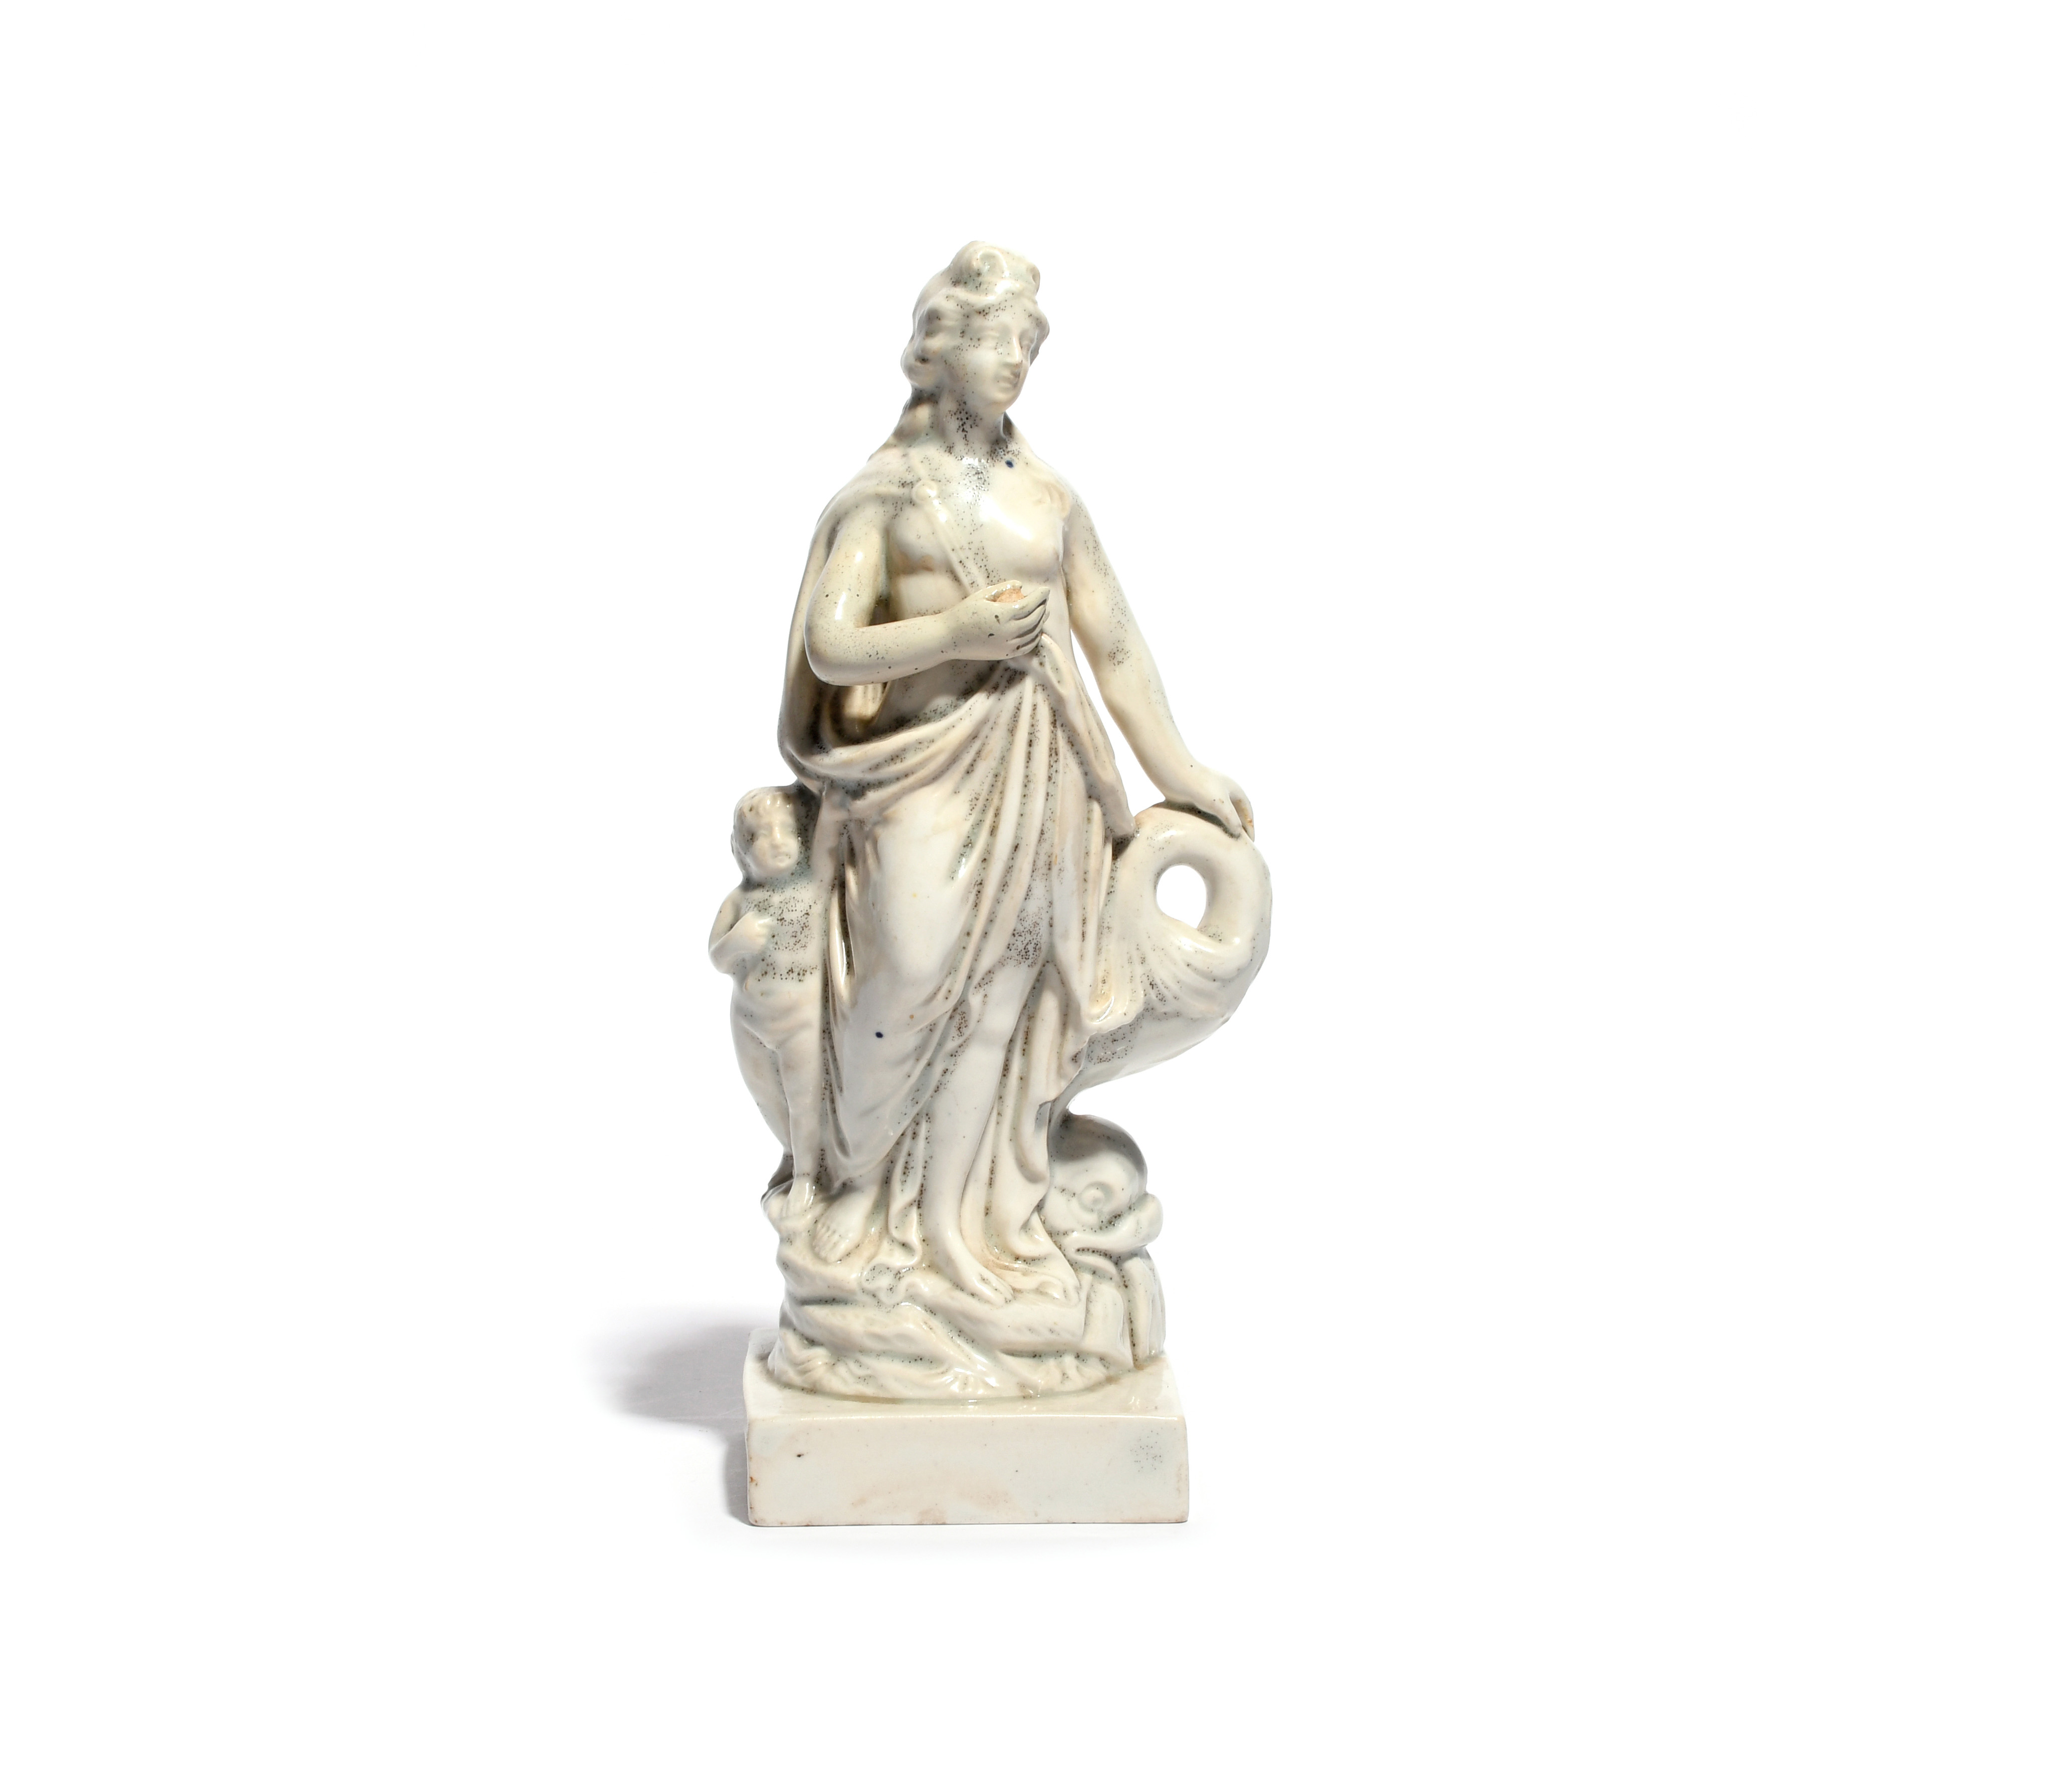 A Staffordshire porcelain figure of Venus late 18th century, standing and resting one hand on the - Image 2 of 3